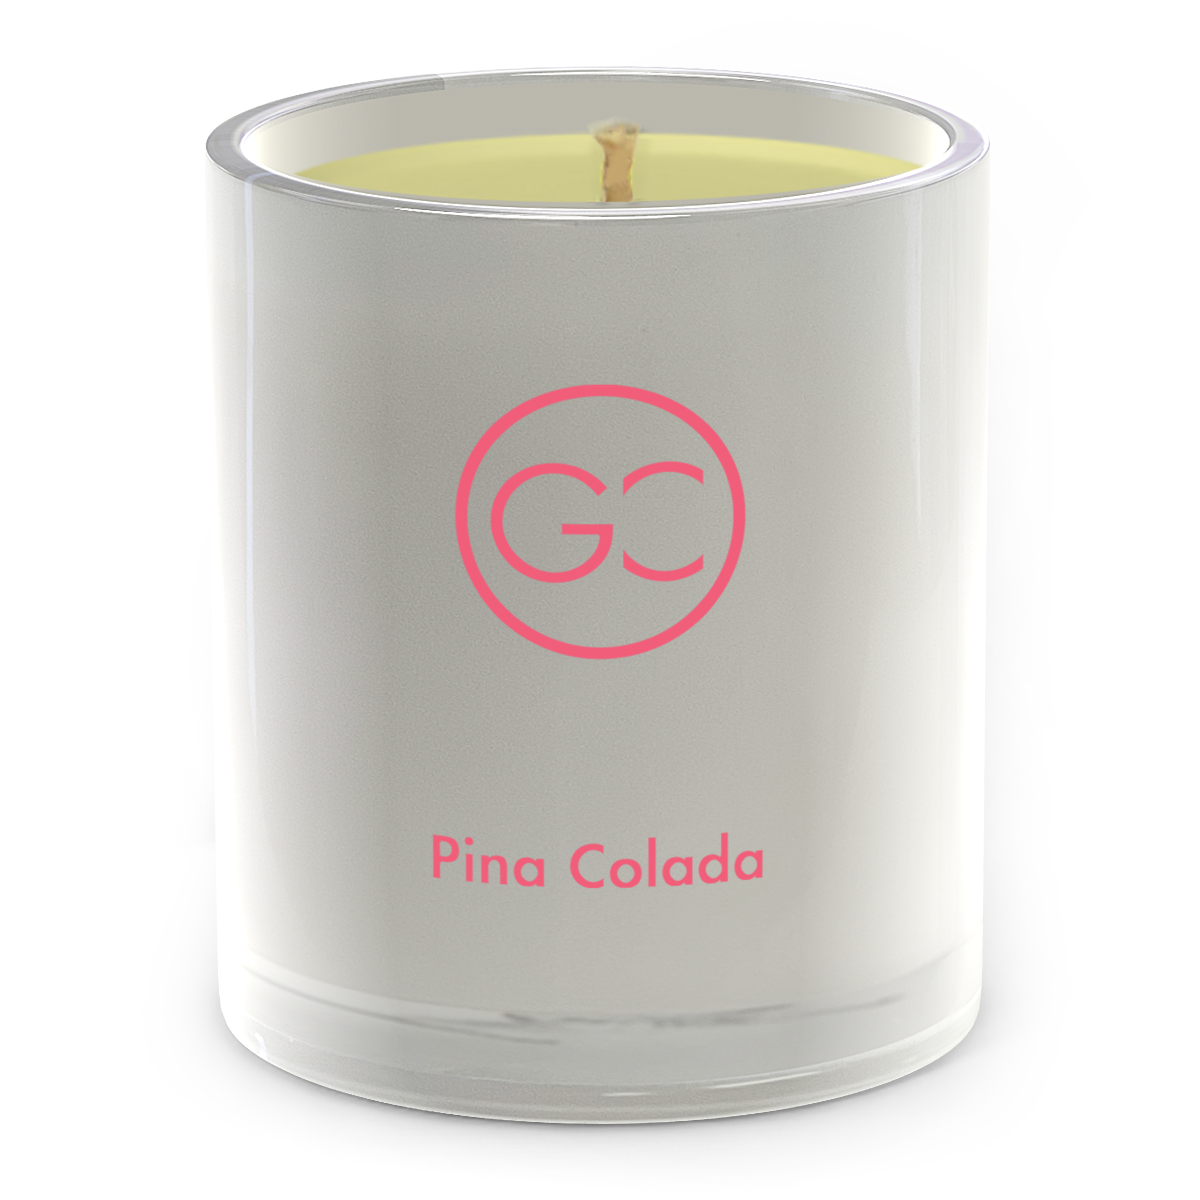 Pina Colada Scented Soy Candle 55hr Burn